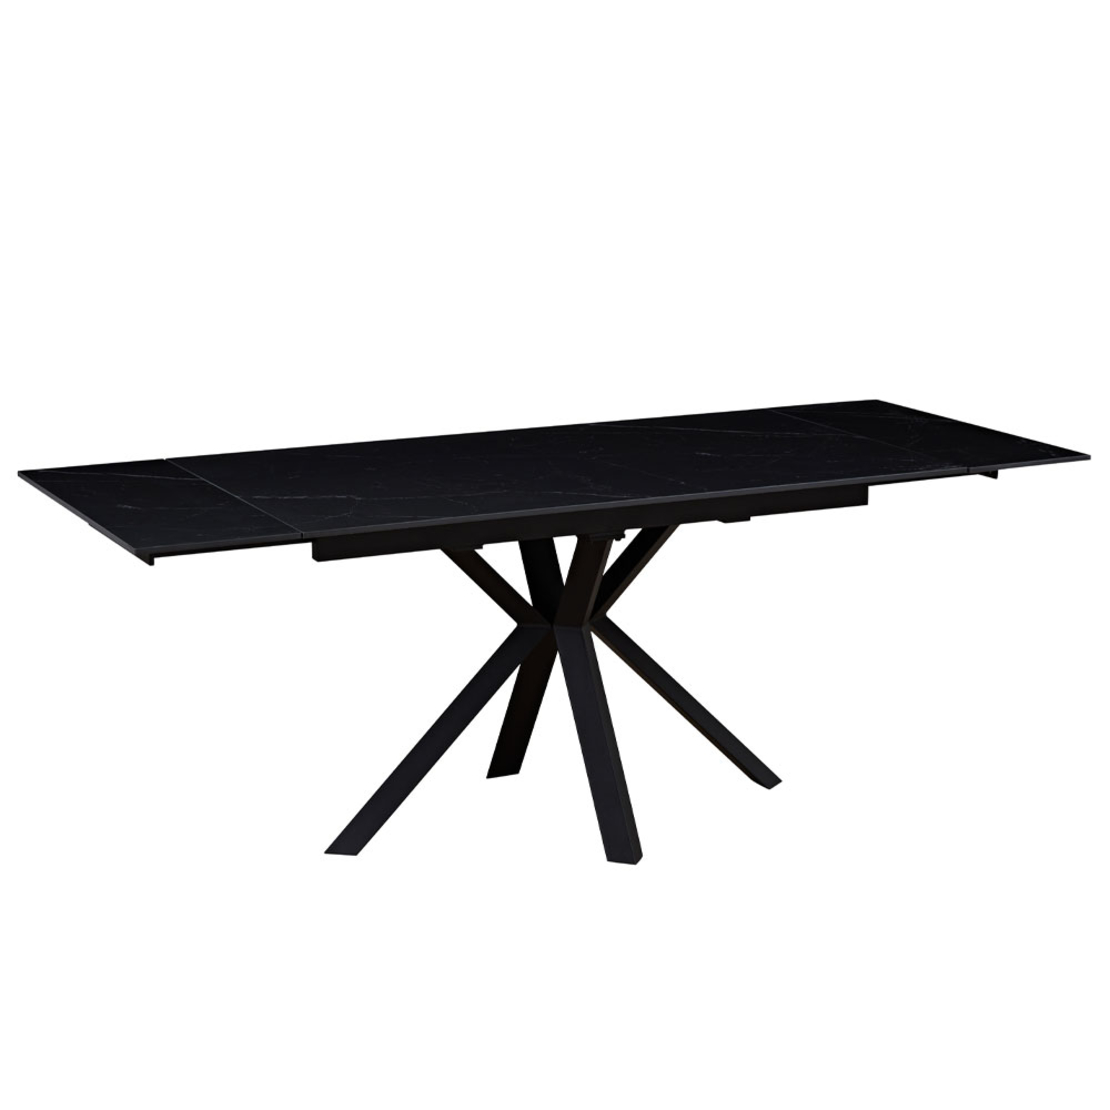 GRADA TABLE EXTENDABLE SINTERED STONE BLACK WITH M